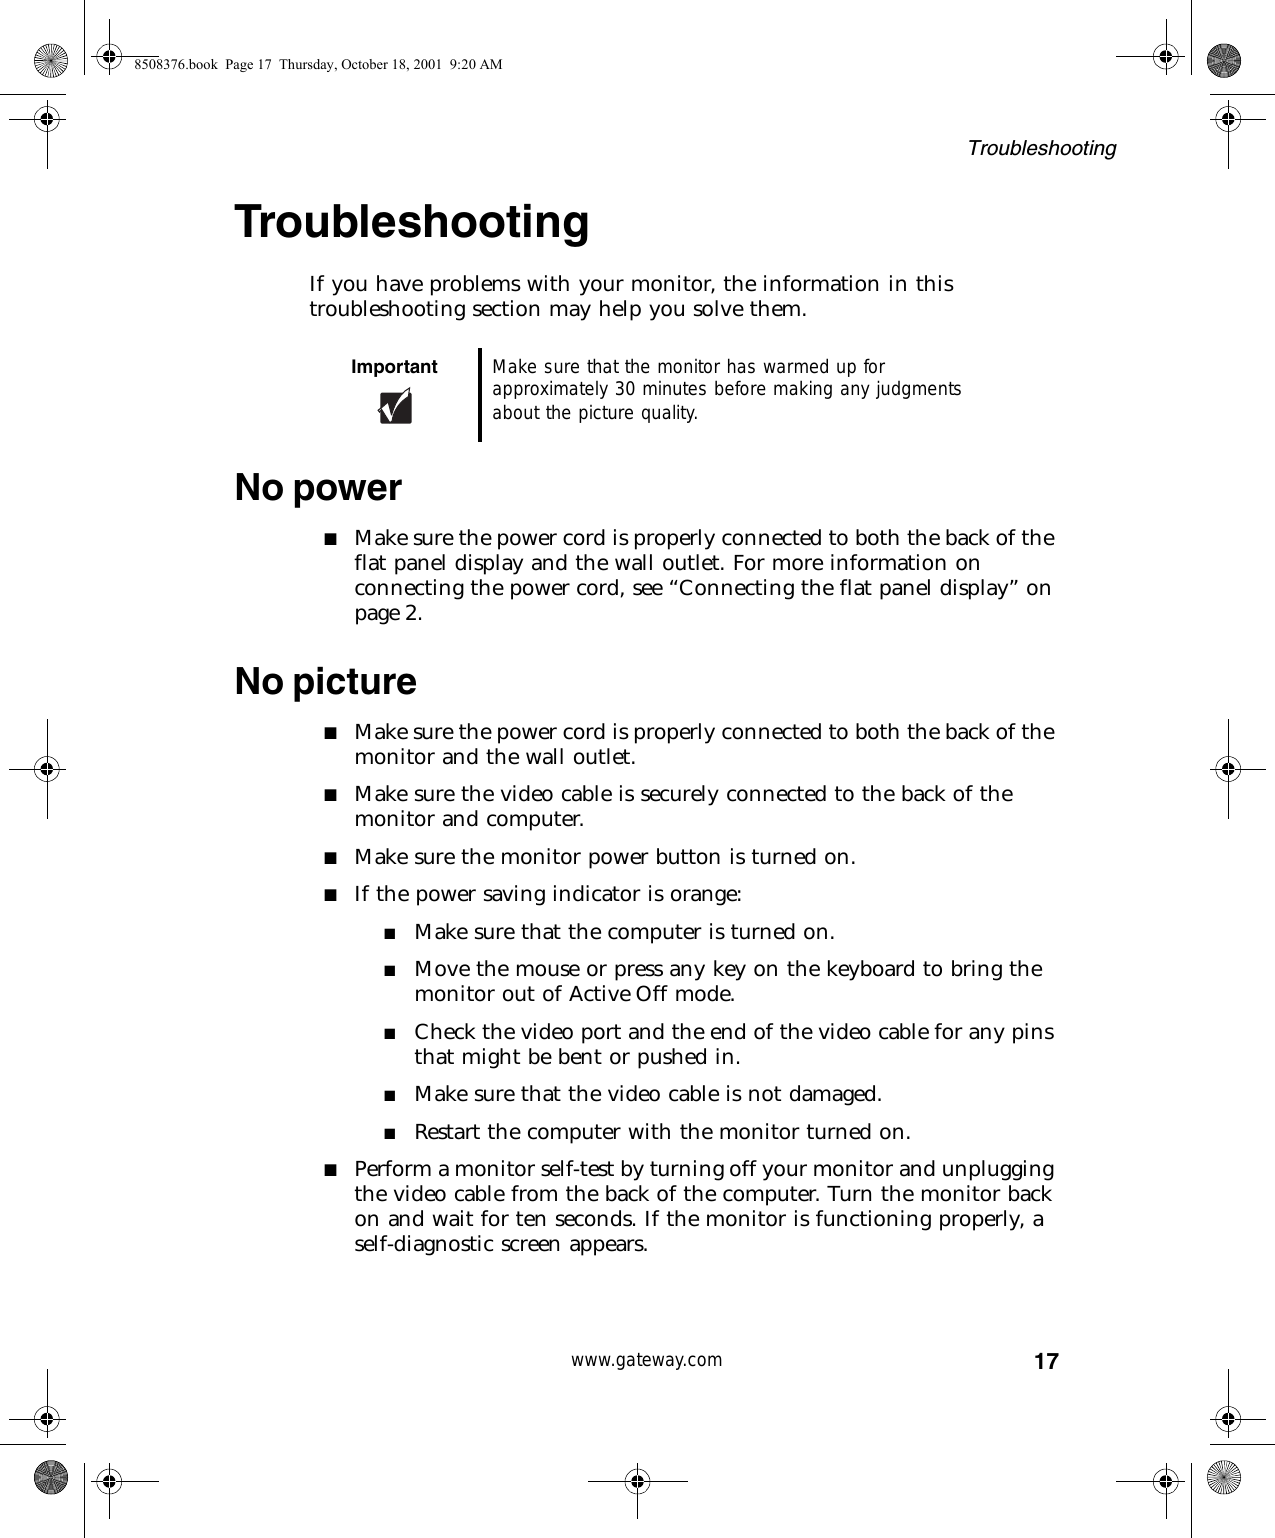 17Troubleshootingwww.gateway.comTroubleshootingIf you have problems with your monitor, the information in this troubleshooting section may help you solve them.No power■Make sure the power cord is properly connected to both the back of the flat panel display and the wall outlet. For more information on connecting the power cord, see “Connecting the flat panel display” on page 2.No picture■Make sure the power cord is properly connected to both the back of the monitor and the wall outlet.■Make sure the video cable is securely connected to the back of the monitor and computer.■Make sure the monitor power button is turned on.■If the power saving indicator is orange:■Make sure that the computer is turned on.■Move the mouse or press any key on the keyboard to bring the monitor out of Active Off mode.■Check the video port and the end of the video cable for any pins that might be bent or pushed in.■Make sure that the video cable is not damaged.■Restart the computer with the monitor turned on.■Perform a monitor self-test by turning off your monitor and unplugging the video cable from the back of the computer. Turn the monitor back on and wait for ten seconds. If the monitor is functioning properly, a self-diagnostic screen appears.Important Make sure that the monitor has warmed up for approximately 30 minutes before making any judgments about the picture quality.8508376.book  Page 17  Thursday, October 18, 2001  9:20 AM